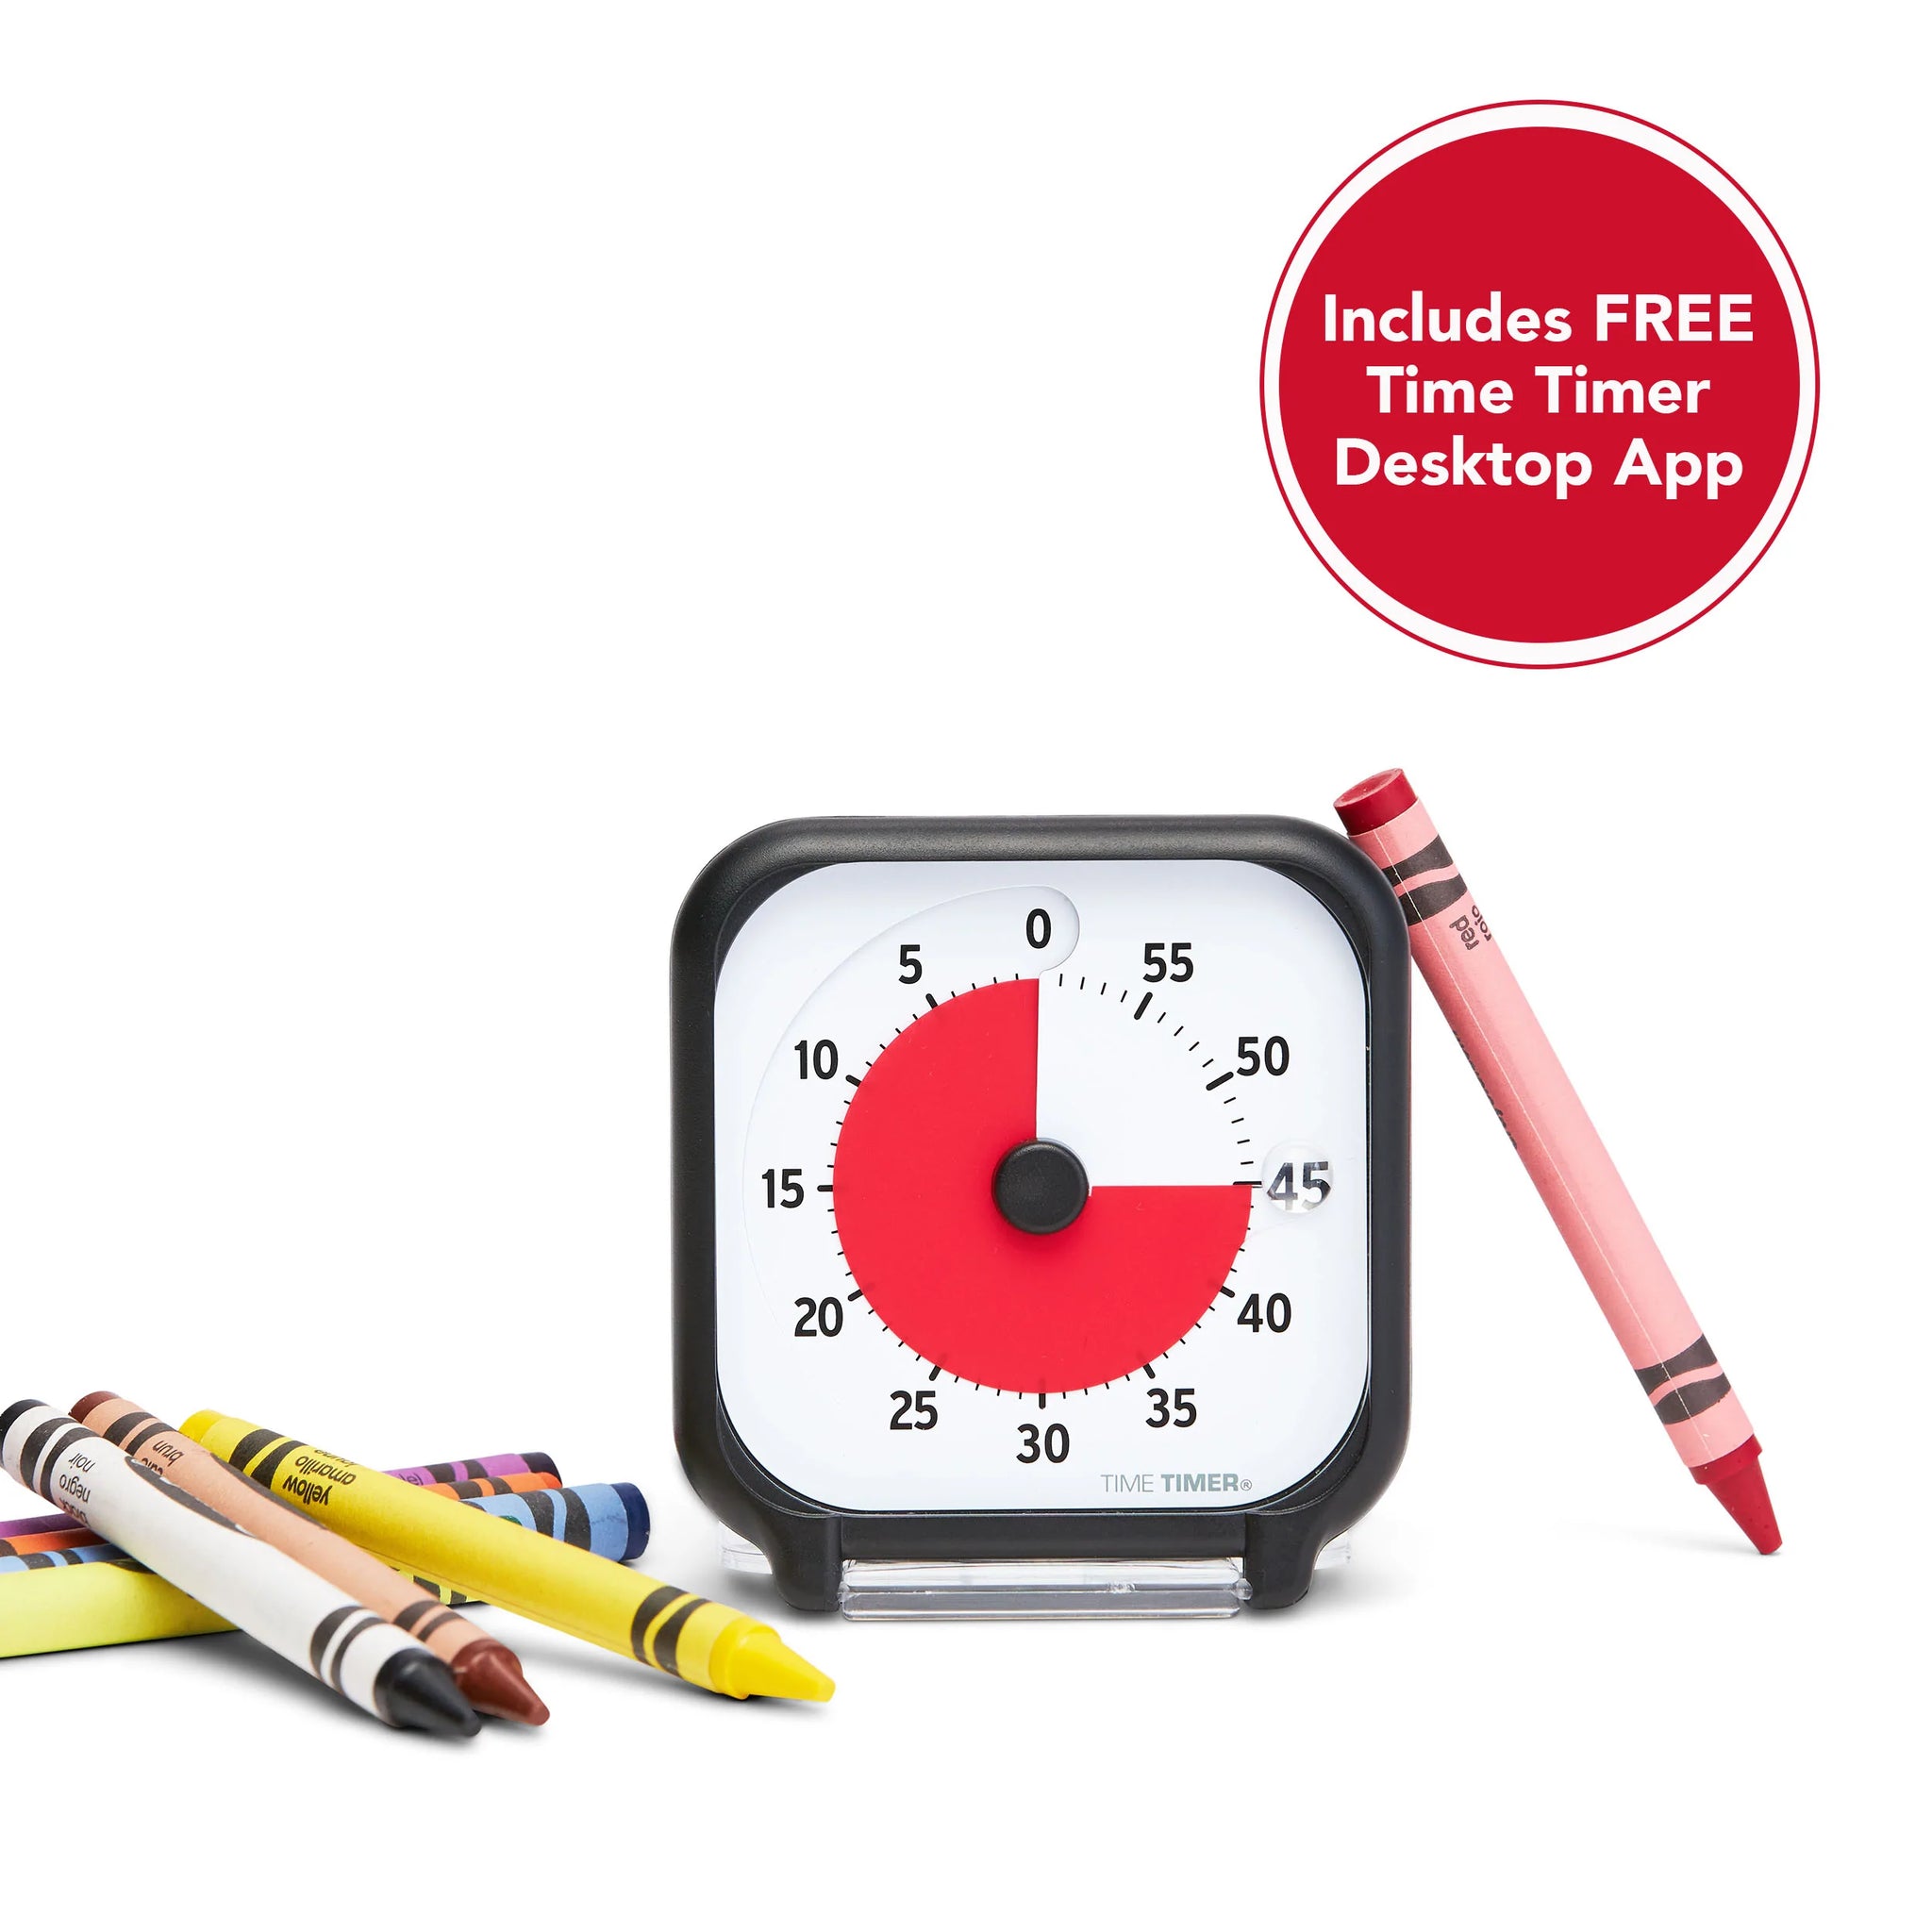 Time Timer Plus with On-the-Go Carry Handle, Charcoal 